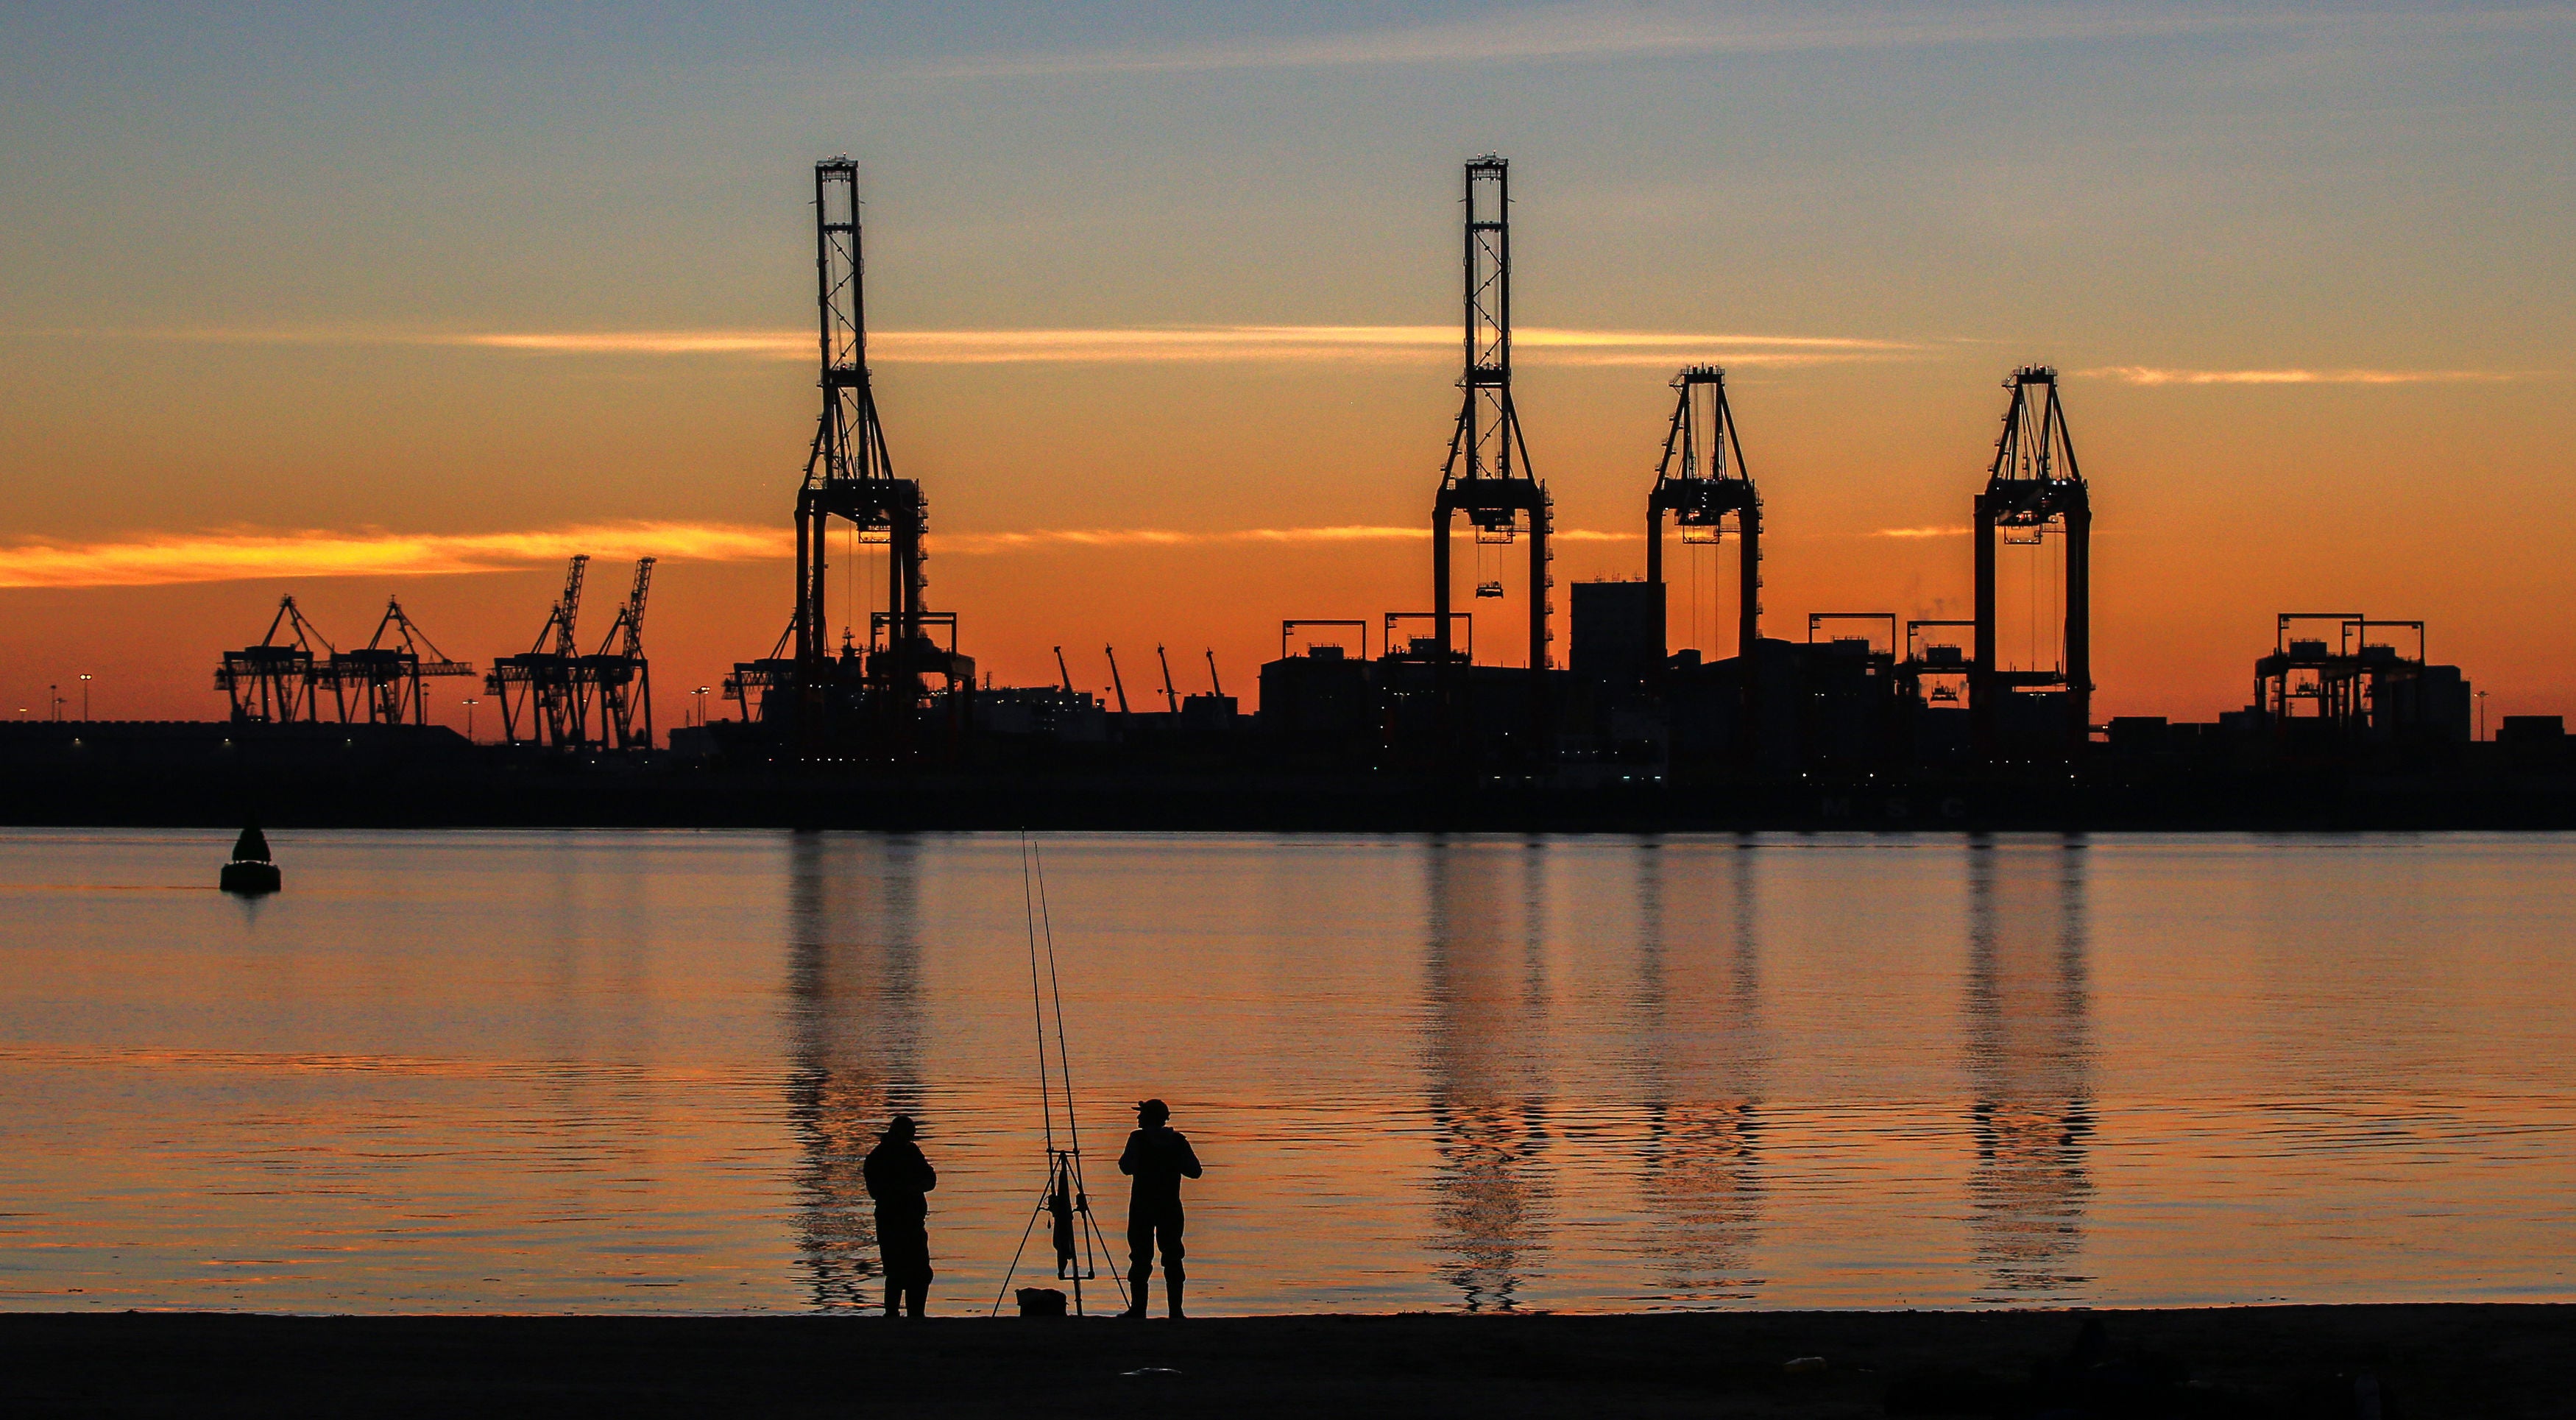 The sun rises over the Port of Liverpool and the River Mersey (Peter Byrne/PA)